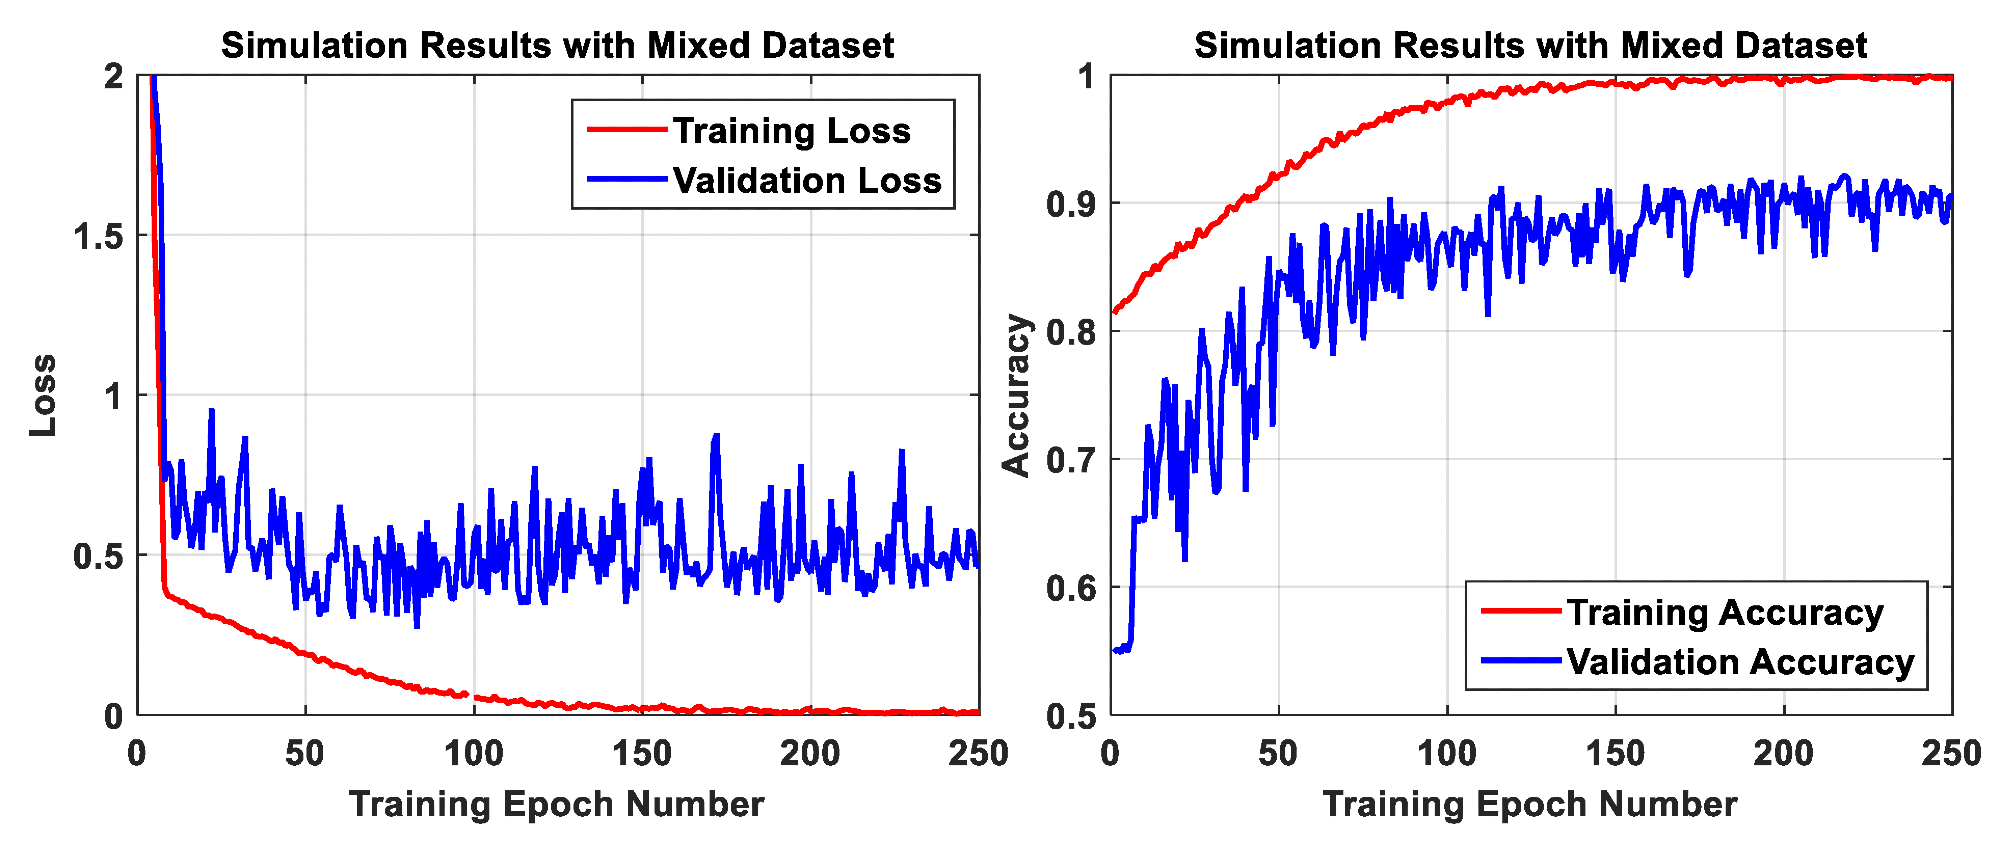 Simulation results of the AI algorithm on the mixed dataset. I